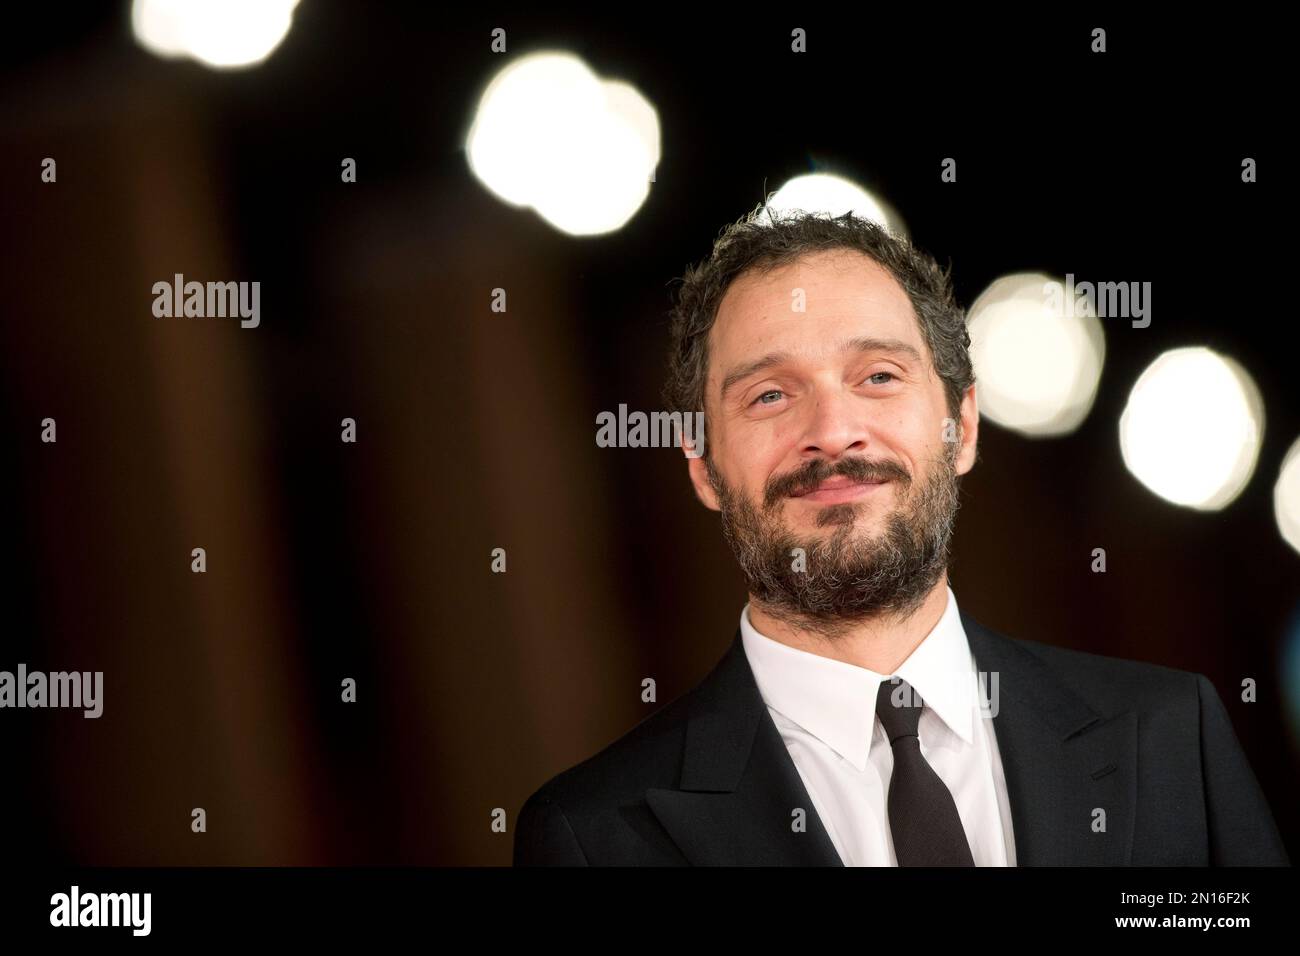 Actor Claudio Santamaria poses for photos as he arrives for the screening of the movie Lo Chiamavano Jeeg Robot (They Called Him Jeeg Robot), at Rome's Film Festival, in Rome, Saturday, Oct. 17, 2015. (AP Photo/Andrew Medichini) Stock Photo